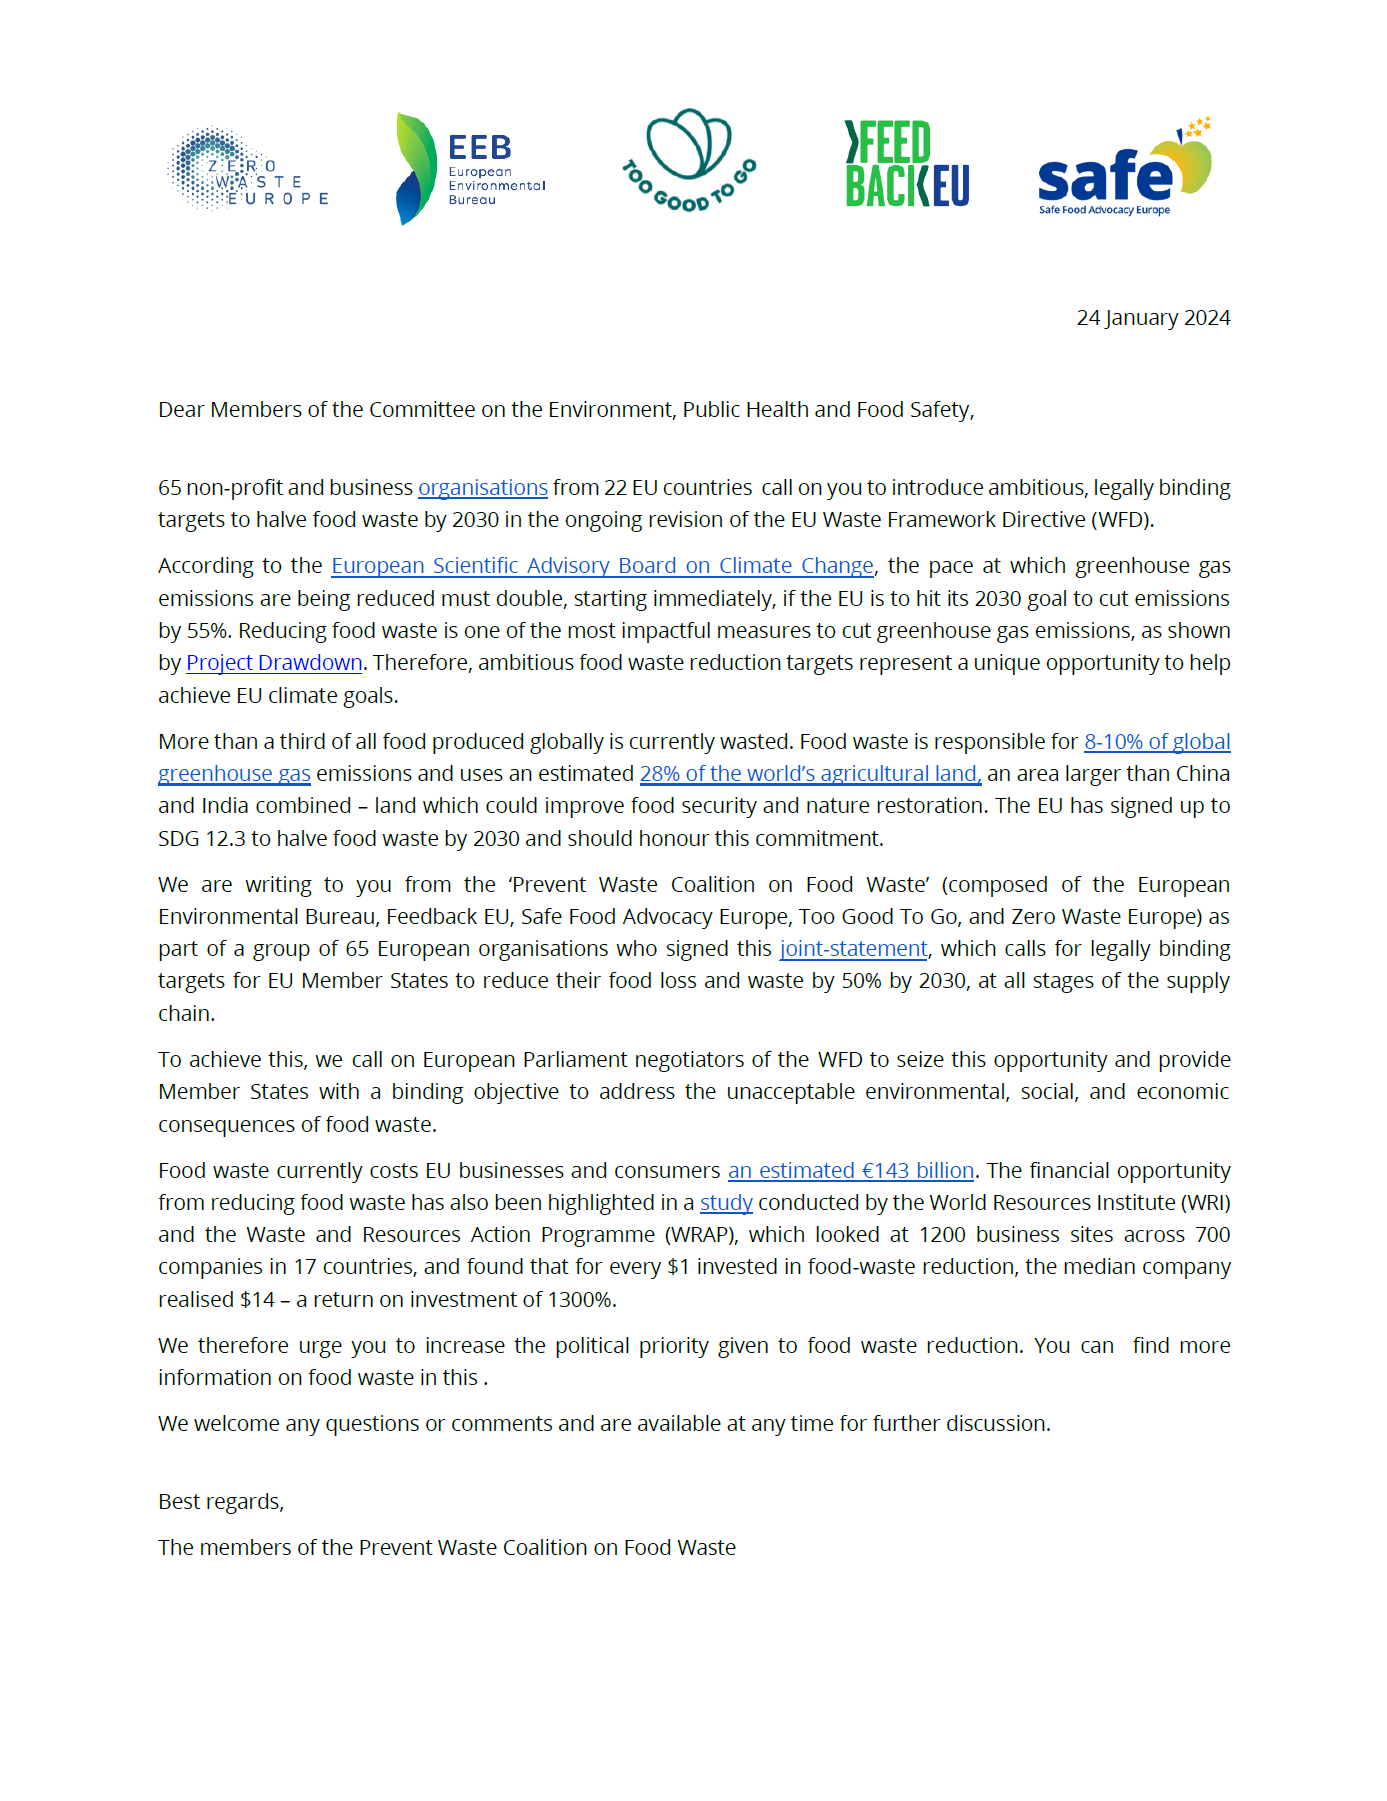 Joint letter calling on the European Parliament to strengthen food waste reduction targets in the Waste Framework Directive revision